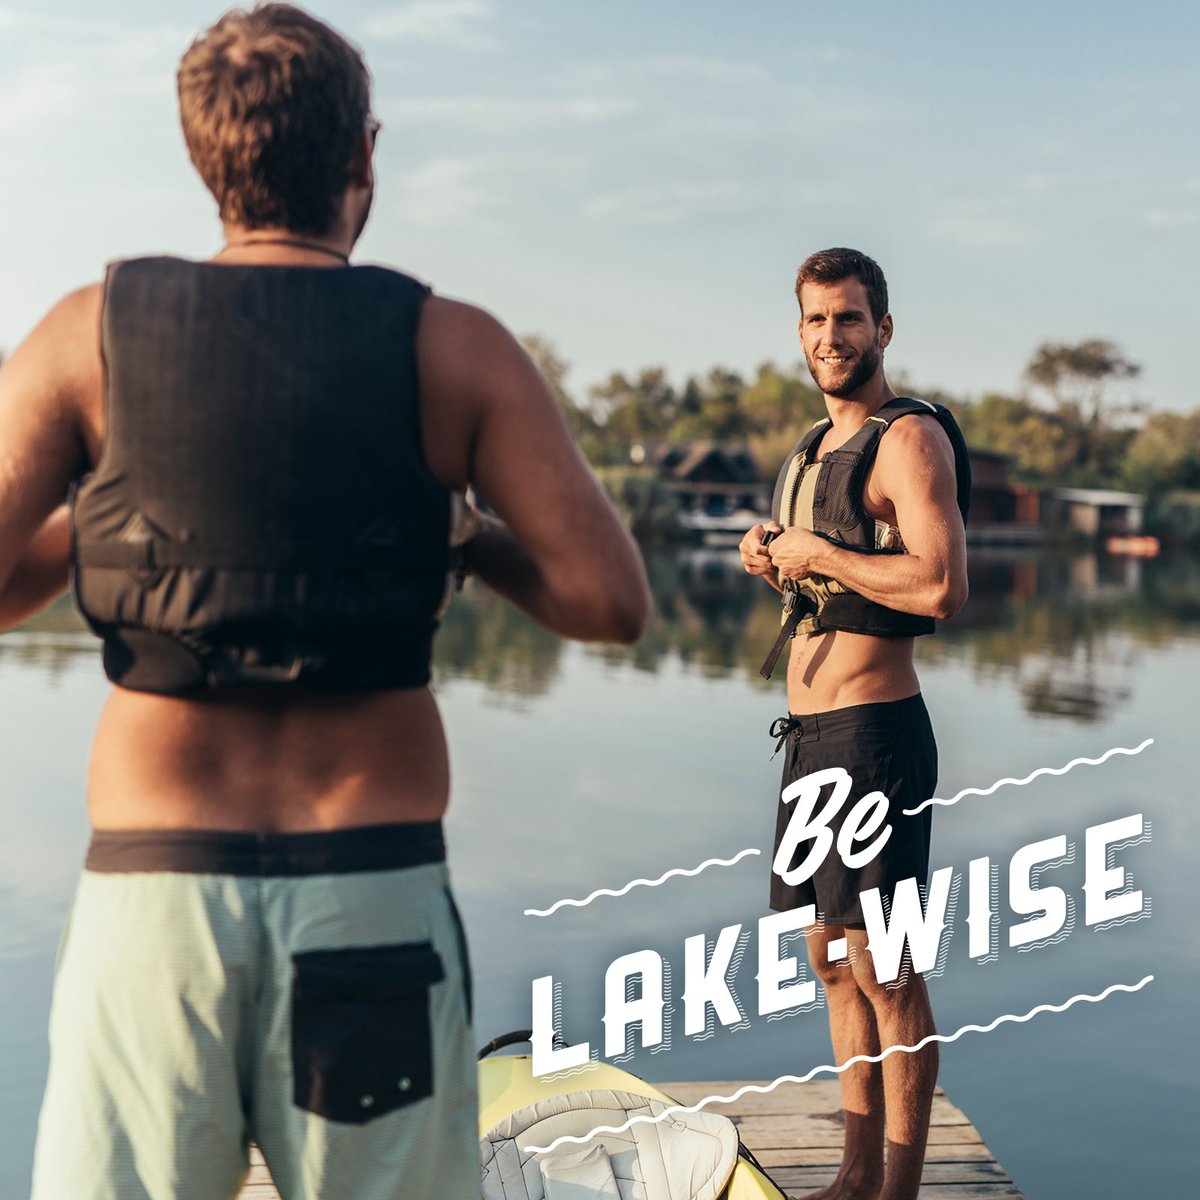 Get ready for lake season and make sure you have a lifejacket that's in good condition, with no holes or tears, and fits properly. Wearing a lifejacket is the best way to #BeLakeWise and protect yourself from drowning. Learn more: lcra.org/belakewise